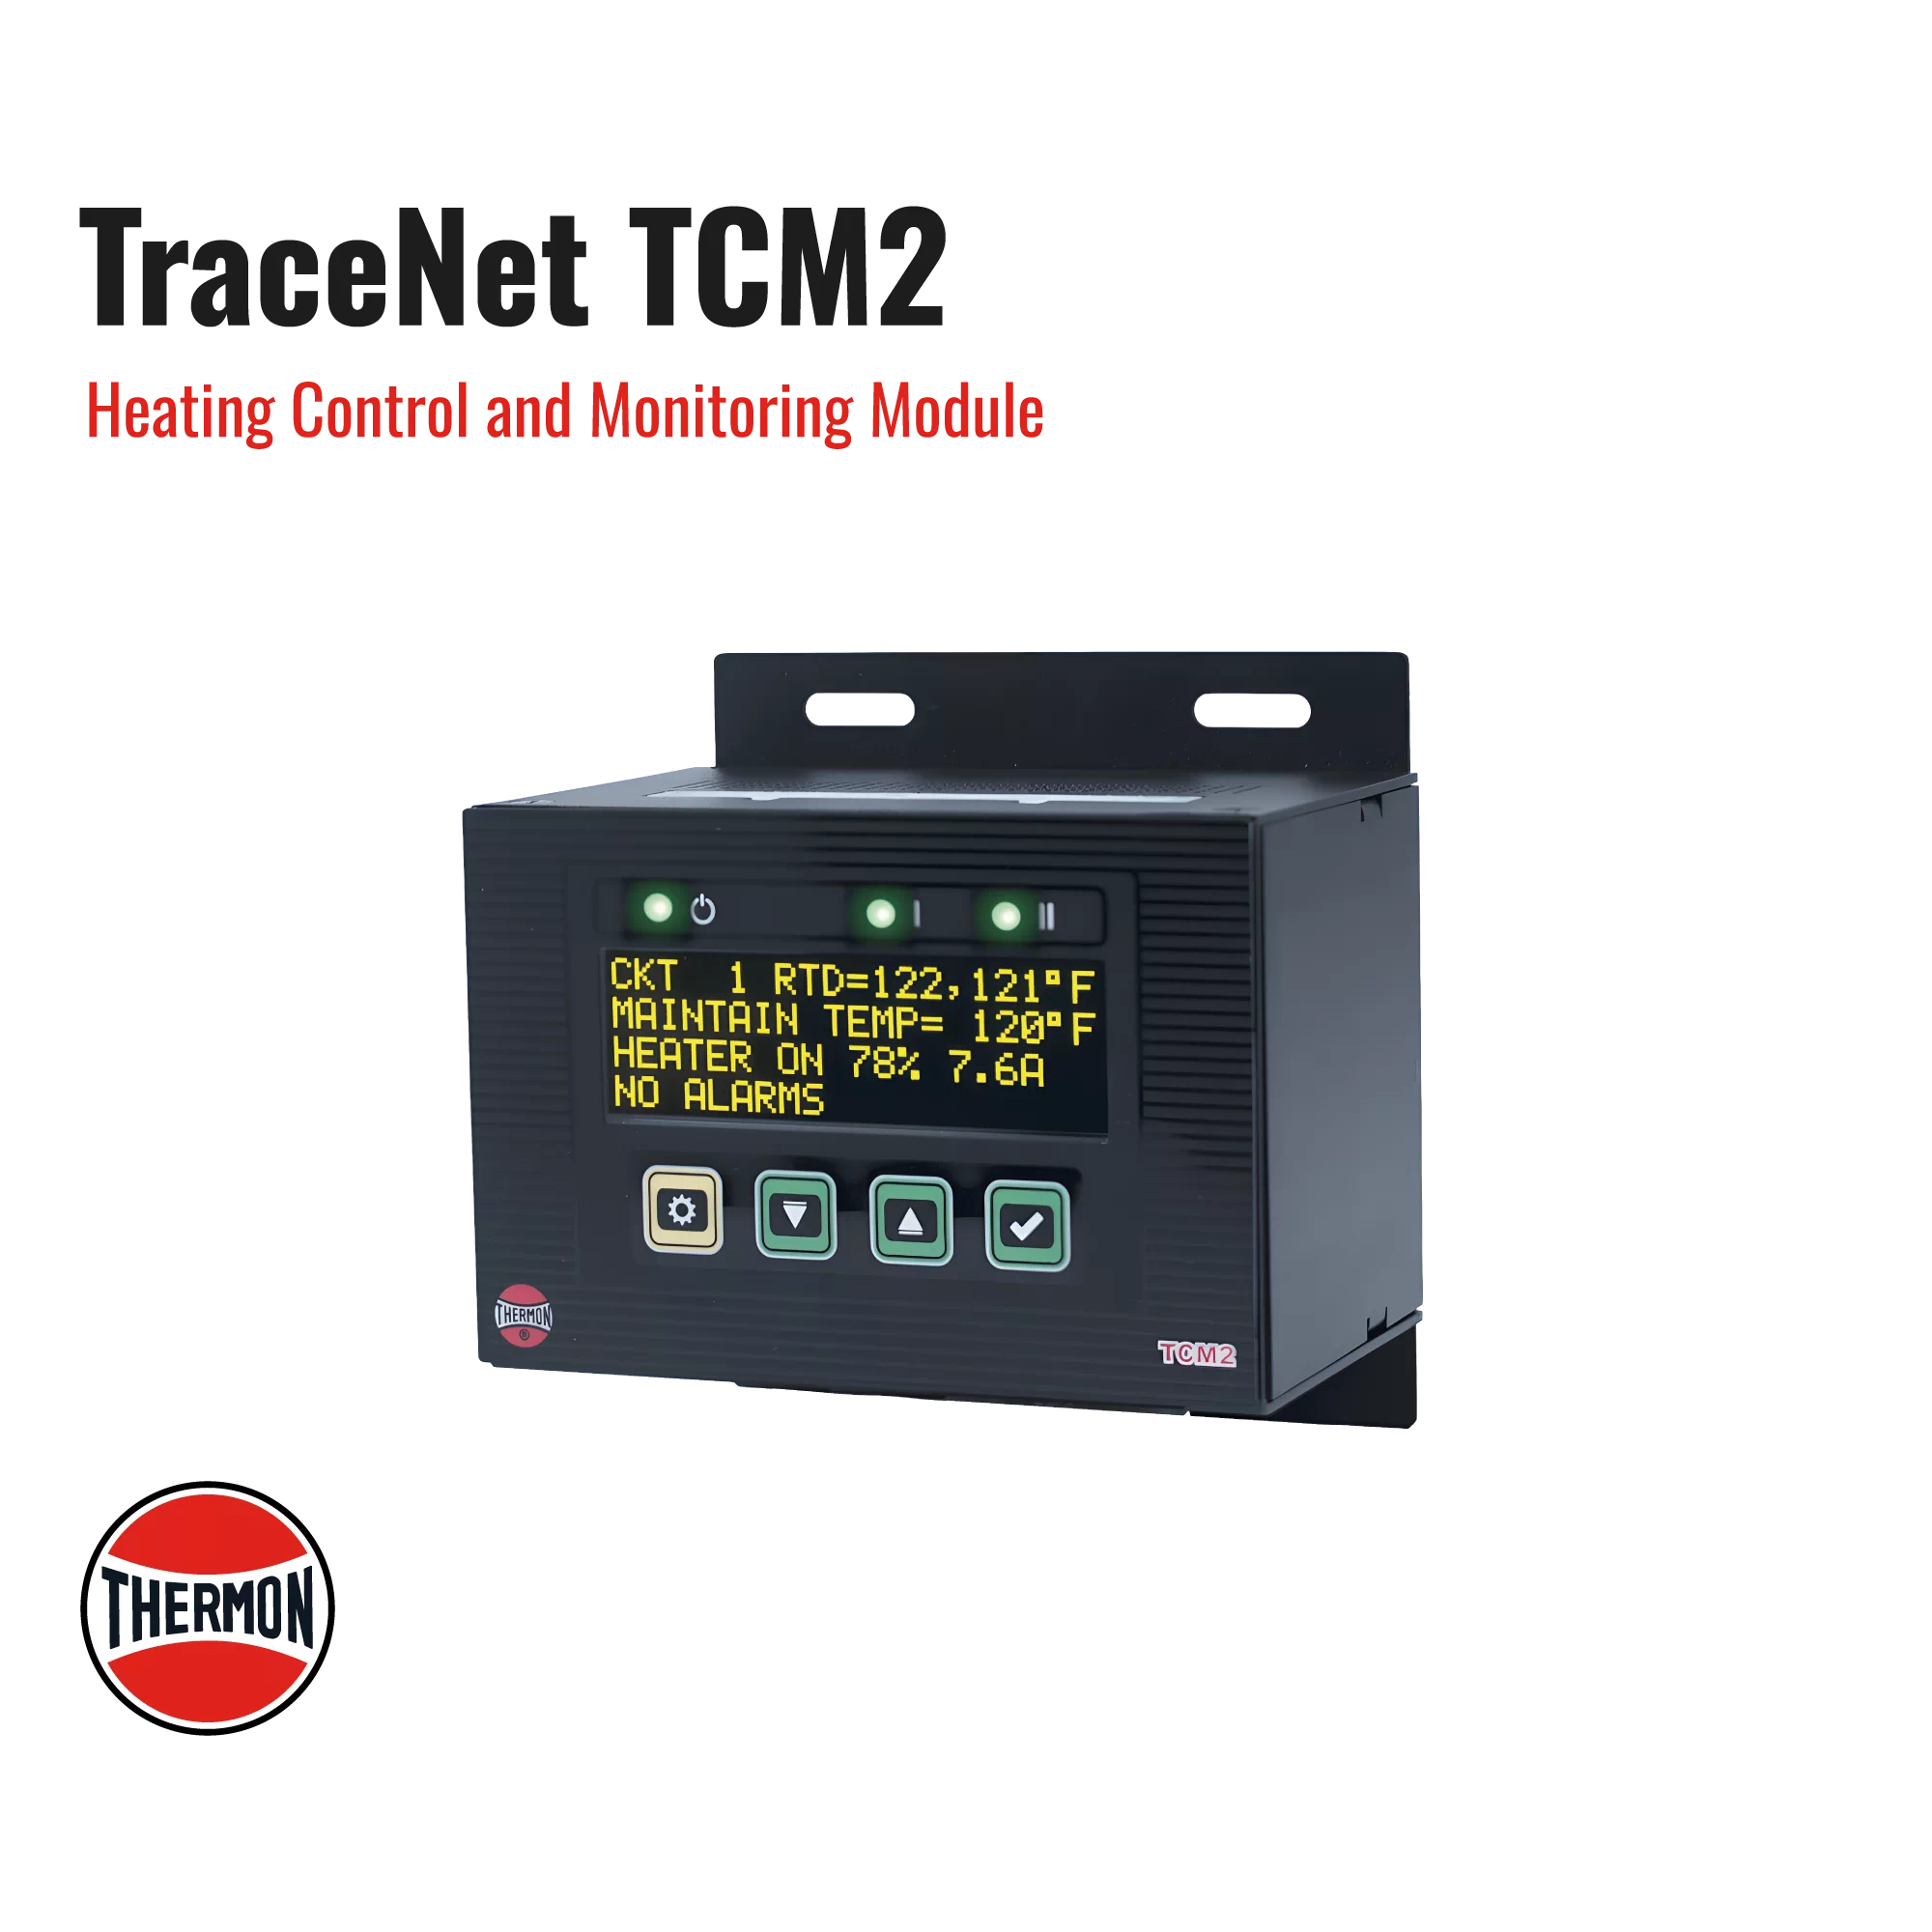 Thermon-TraceNet-TCM2-Industrial-Heating-Heat-Tracing-Systems